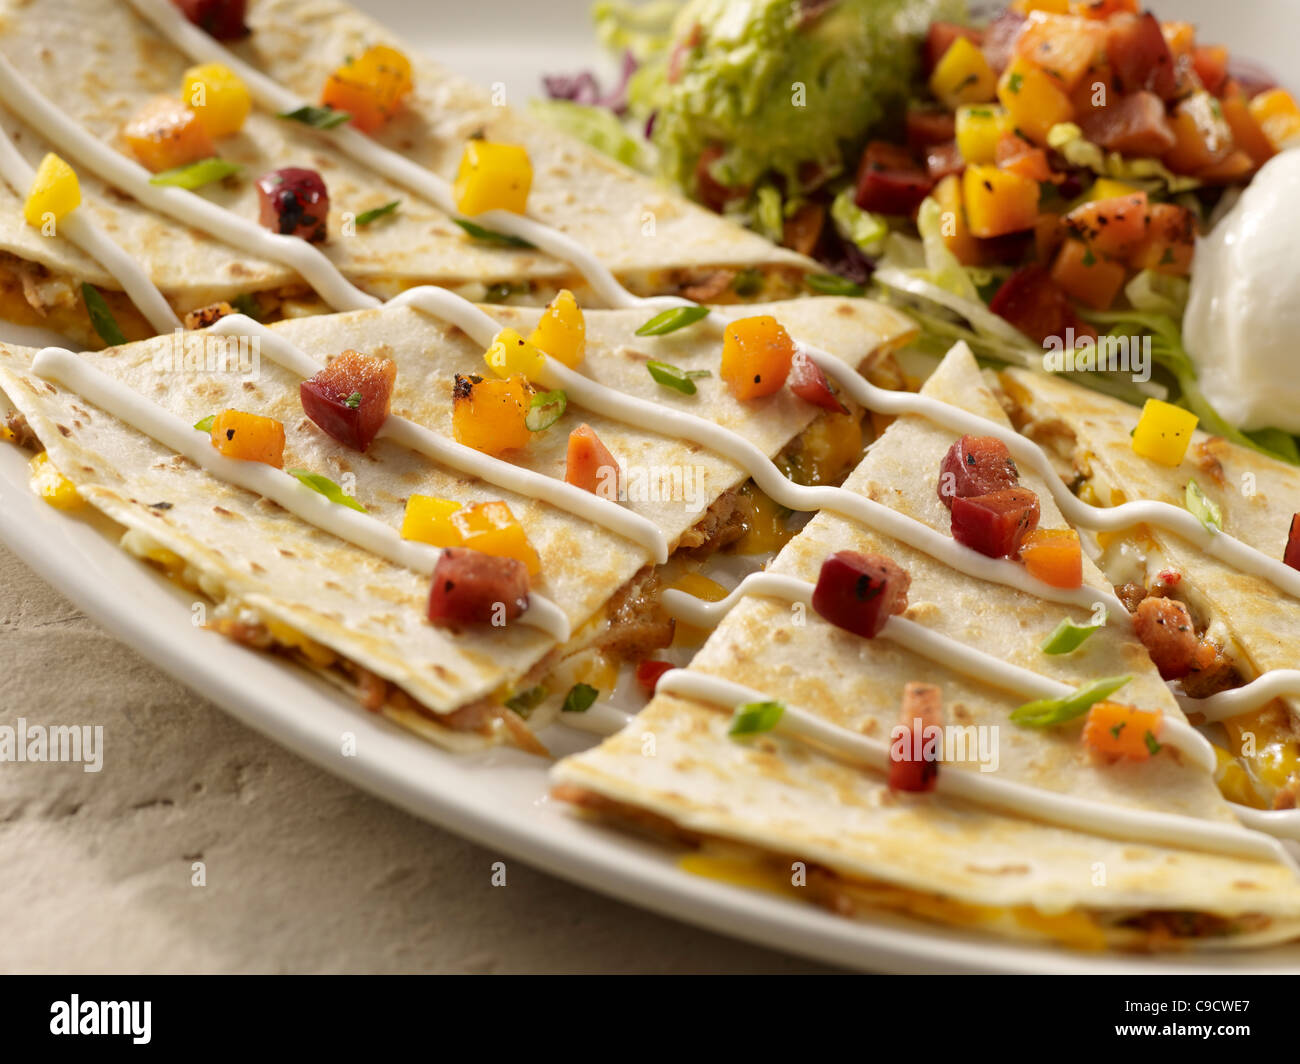 A carnitas quesadilla topped with salsa and served with sour cream and guacamole Stock Photo